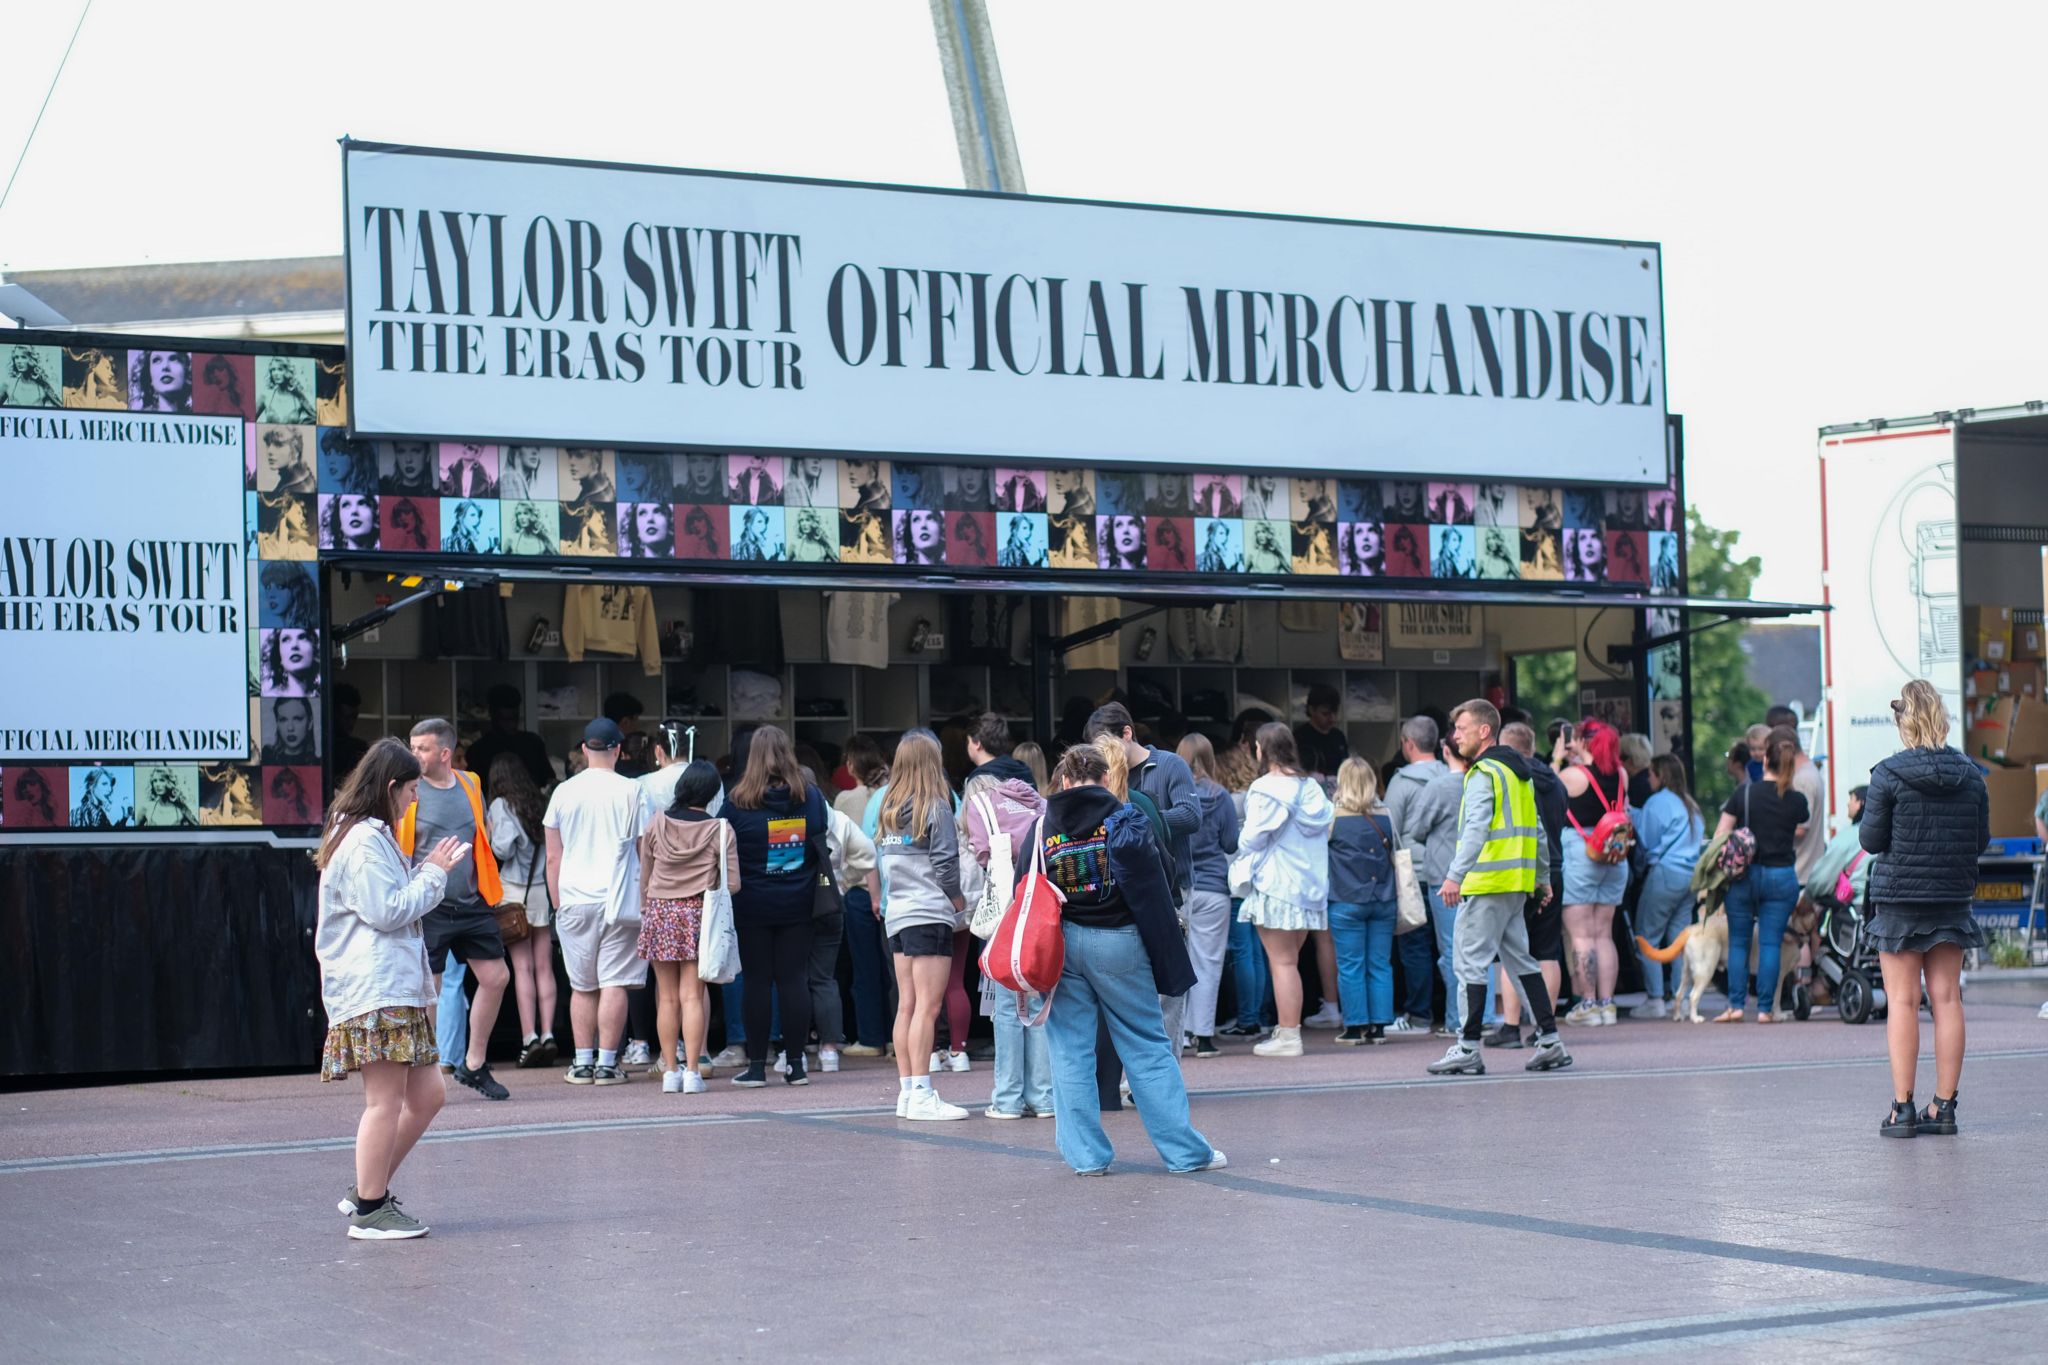 Taylor Swift fans queuing outside Principality Stadium